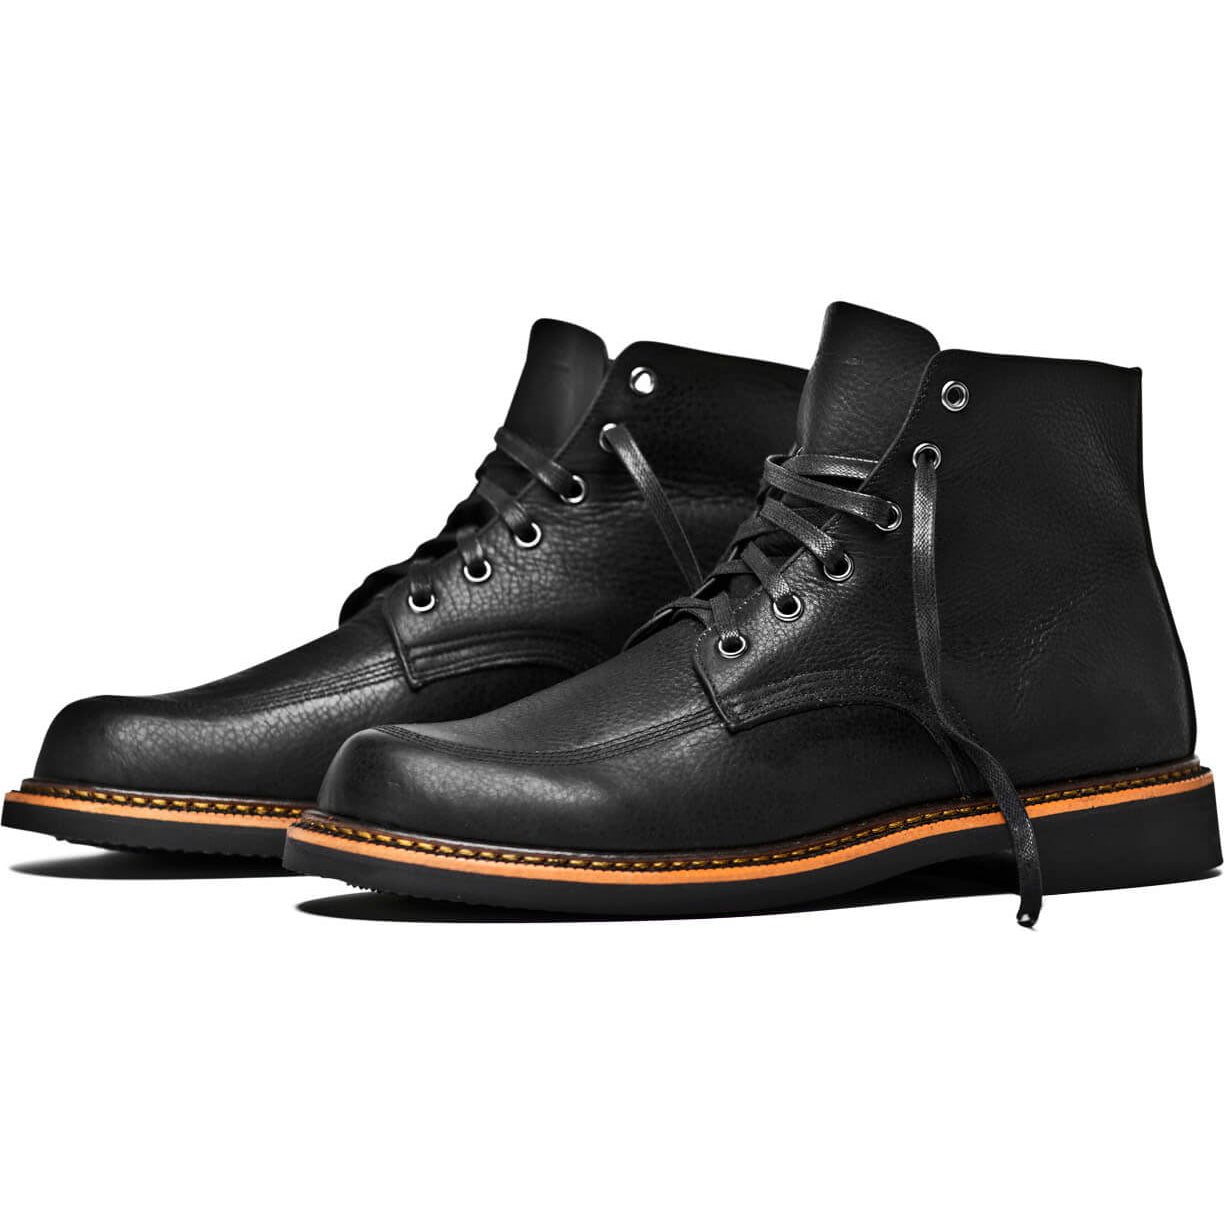 A pair of comfortable Davis black leather boots with orange soles from Broken Homme.